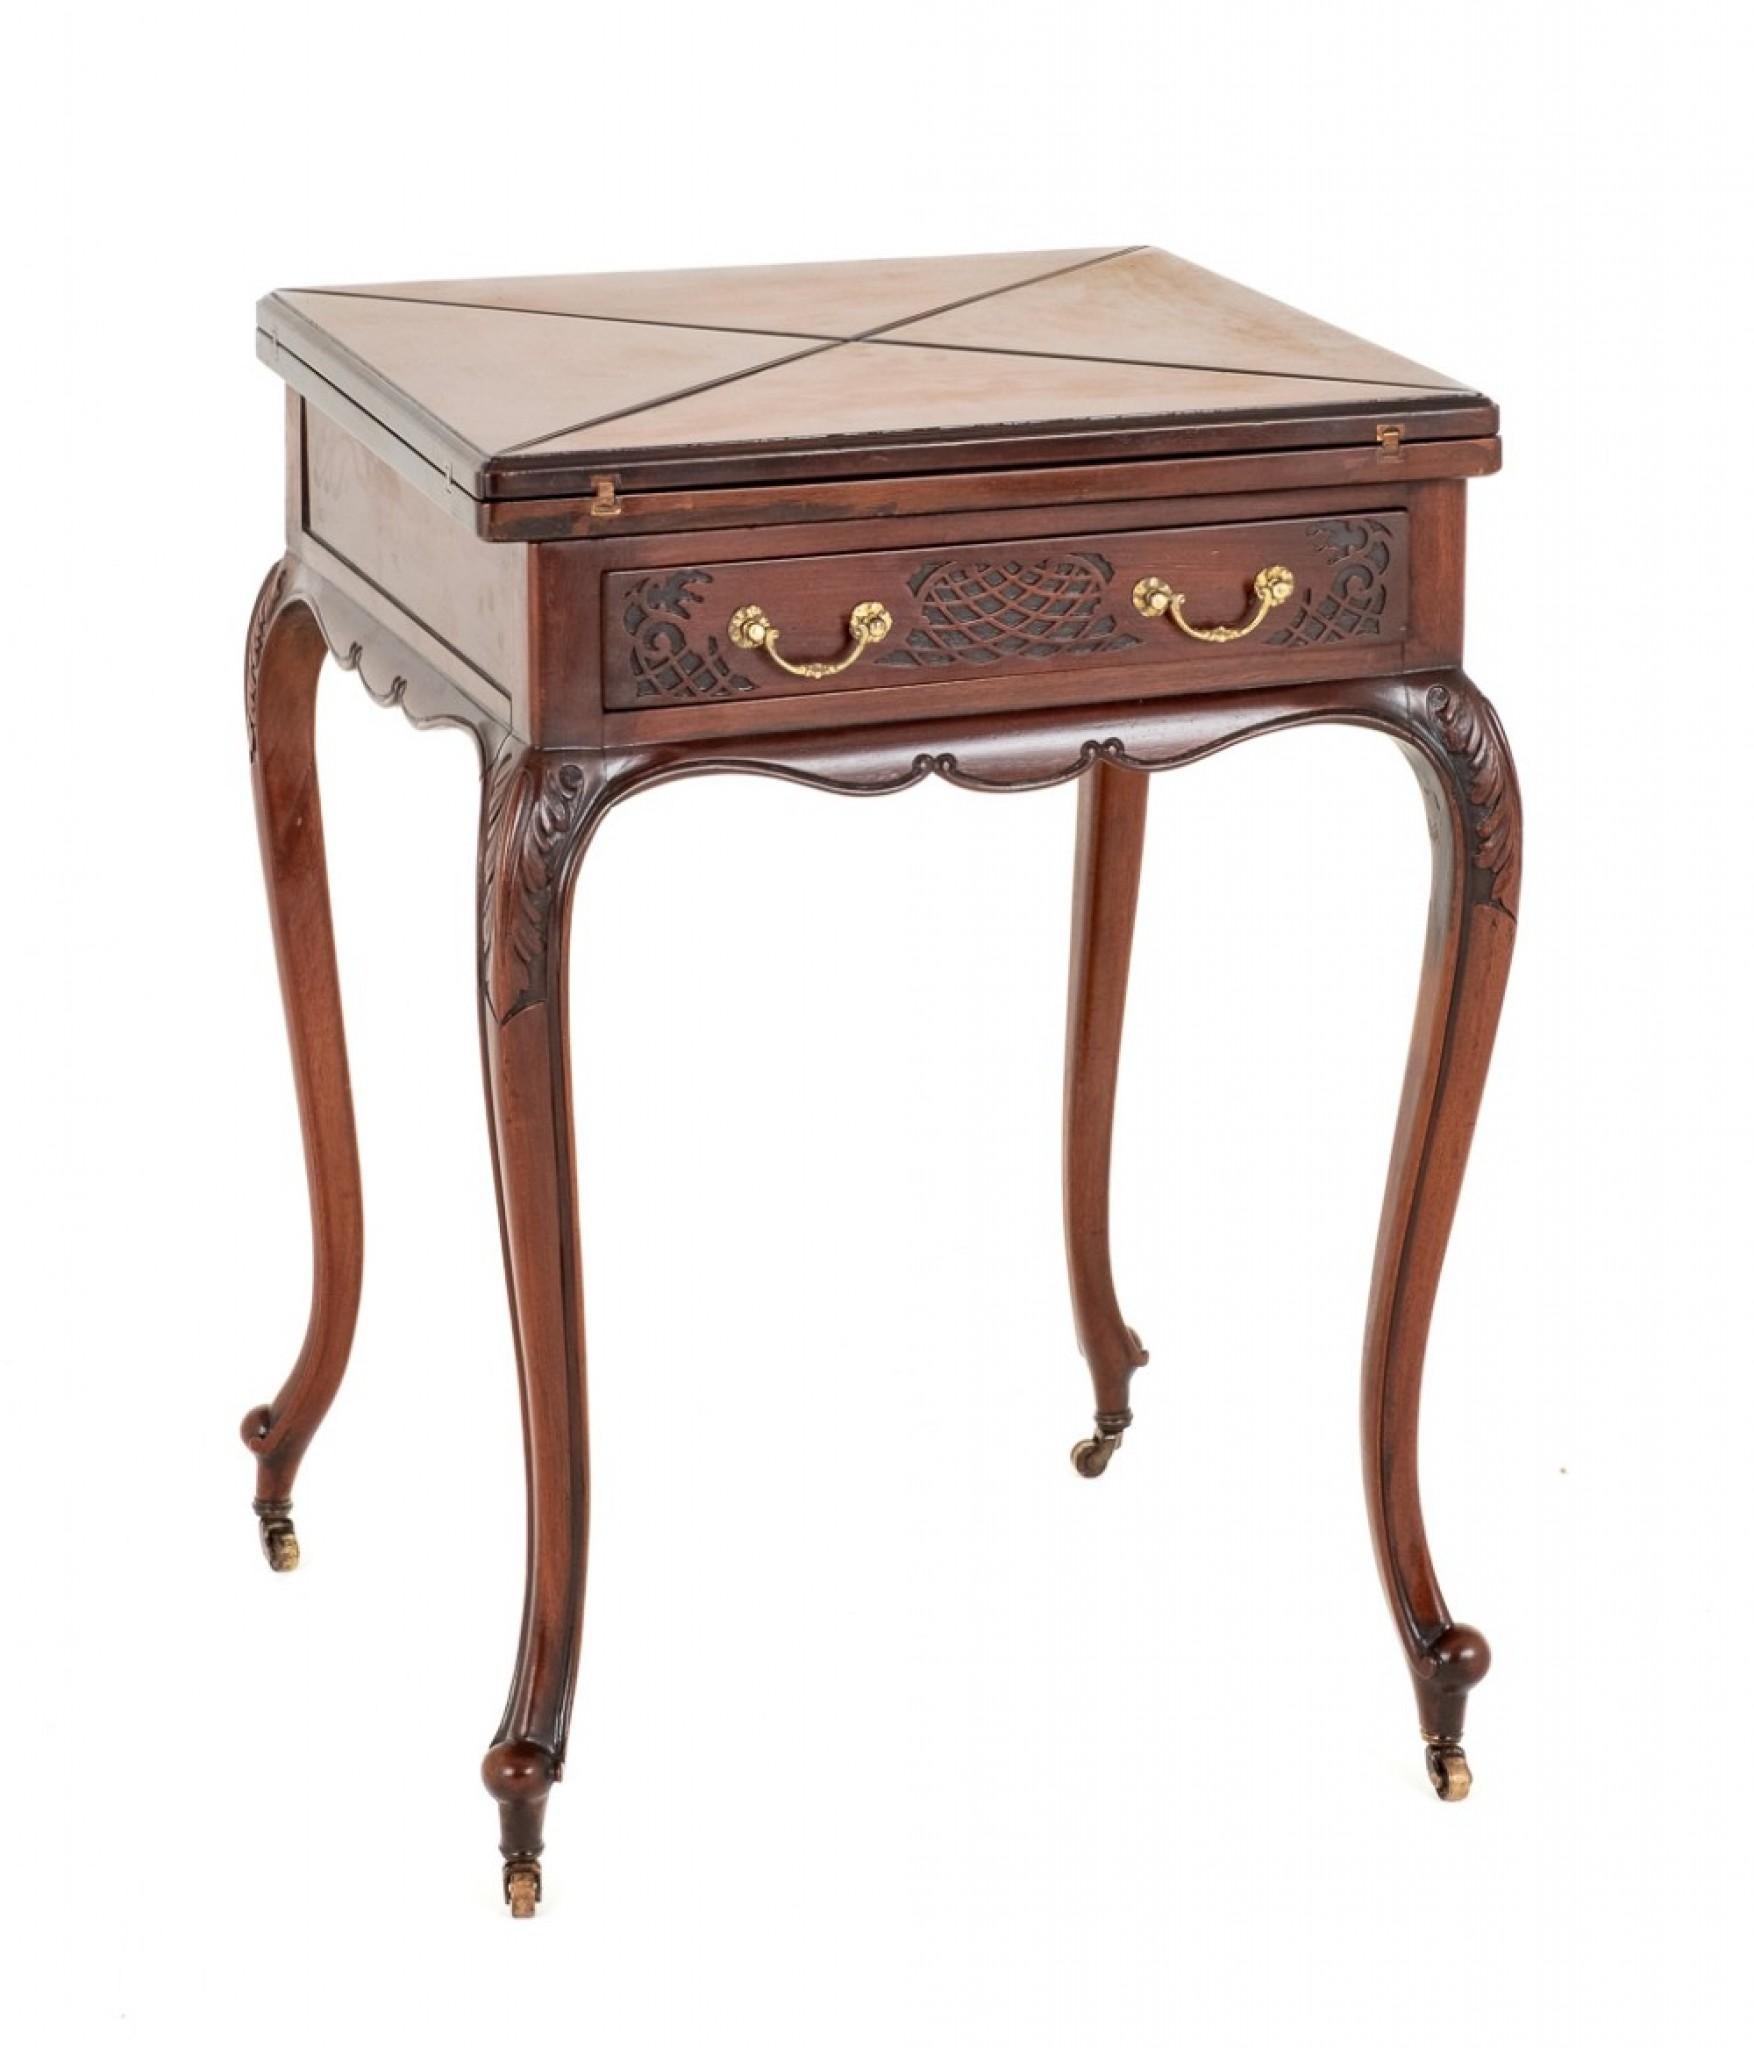 Pretty Late Victorian Mahogany Envelope Card Table.
This Table Stands upon Shaped Legs with Carved Toes and Brass Castors.
Circa 1890
The Knees of the Legs Having Carved Decoration.
The Card Table Features 1 Mahogany Lined Drawer with Fret work and